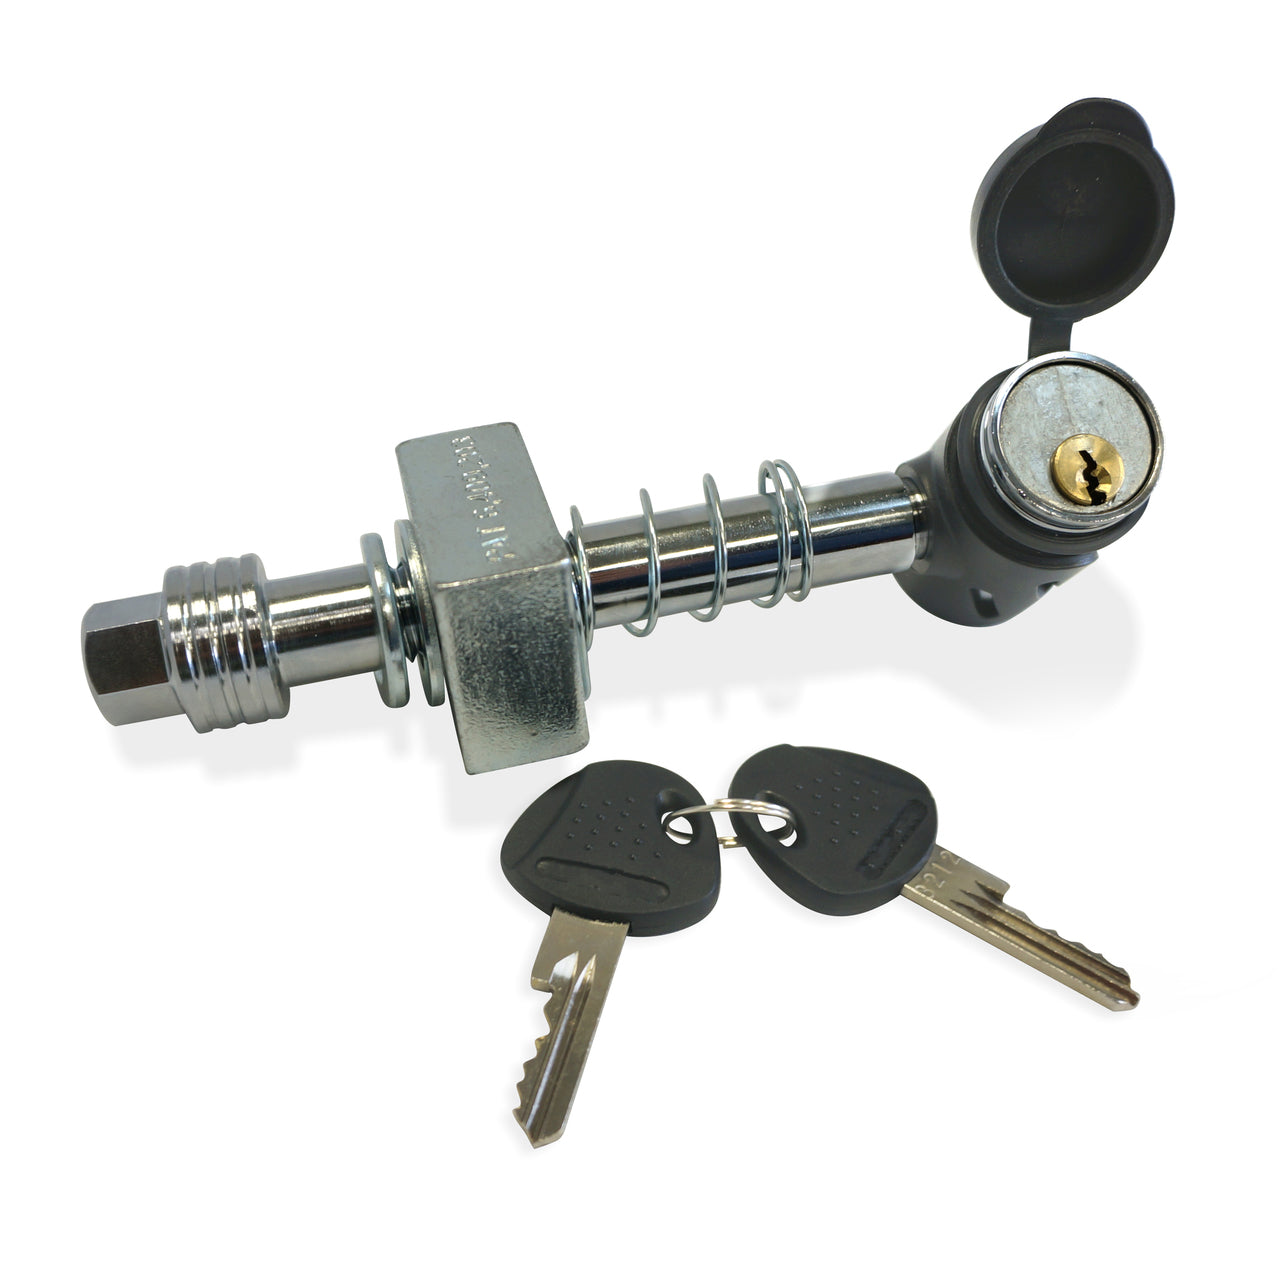 1/4 in. Trailer Coupler Pin Lock with 2 Keys